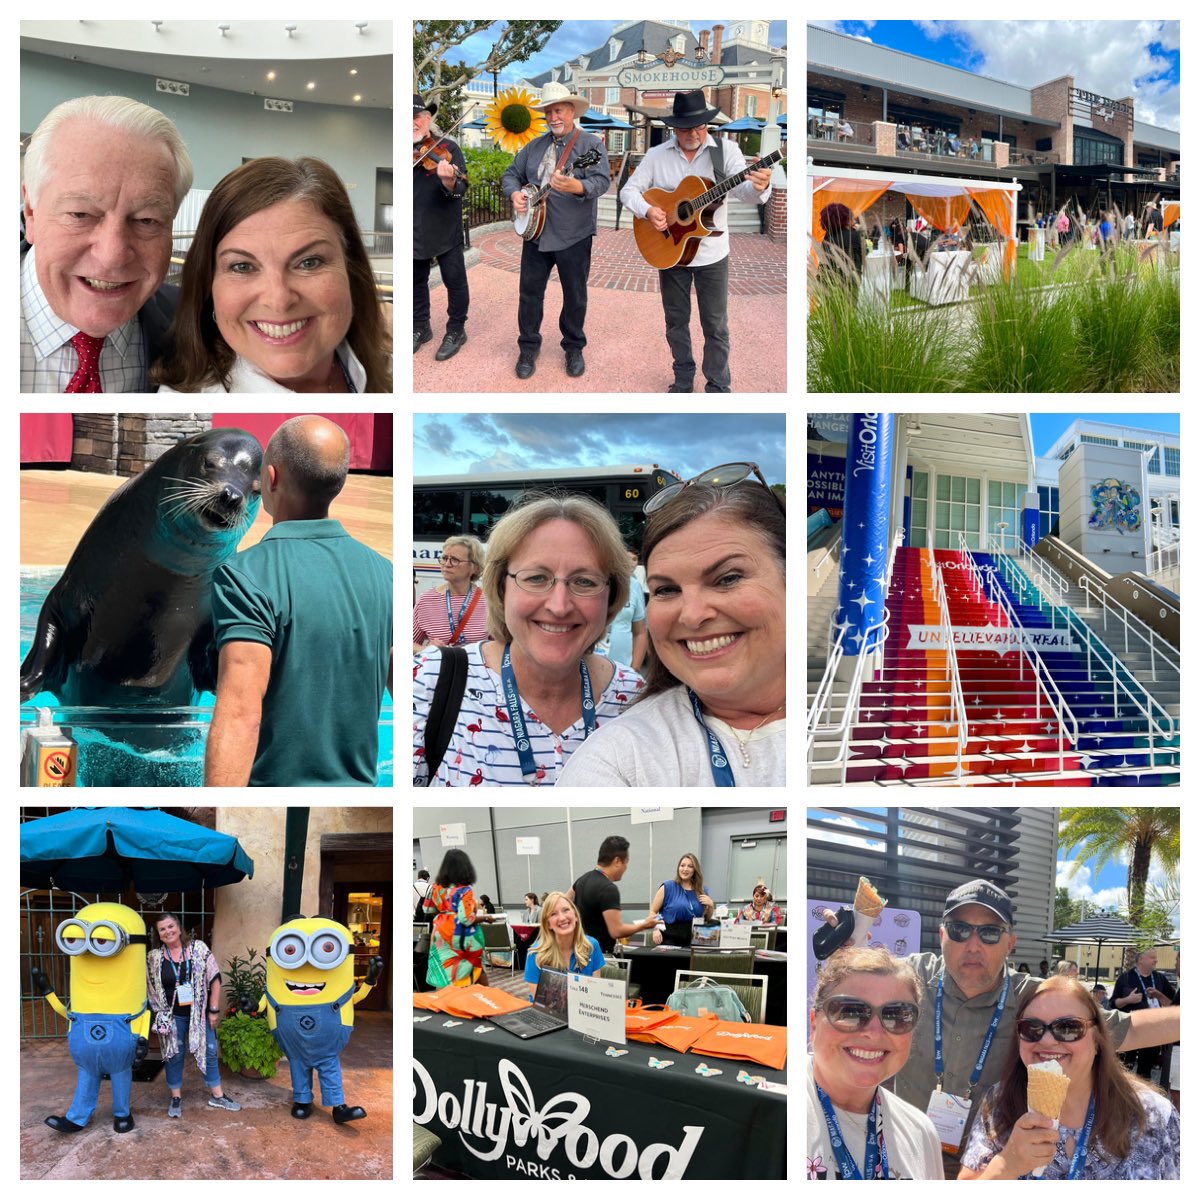 In 2022, #IPW ventured to Orlando, where @UniversalORL and @DisneyParks provided awesome private events. Living close and visiting Orlando often, IPW still showed me new parts of town and things to do. I also had my first @SeaWorld experience and loved it! #ipw2024